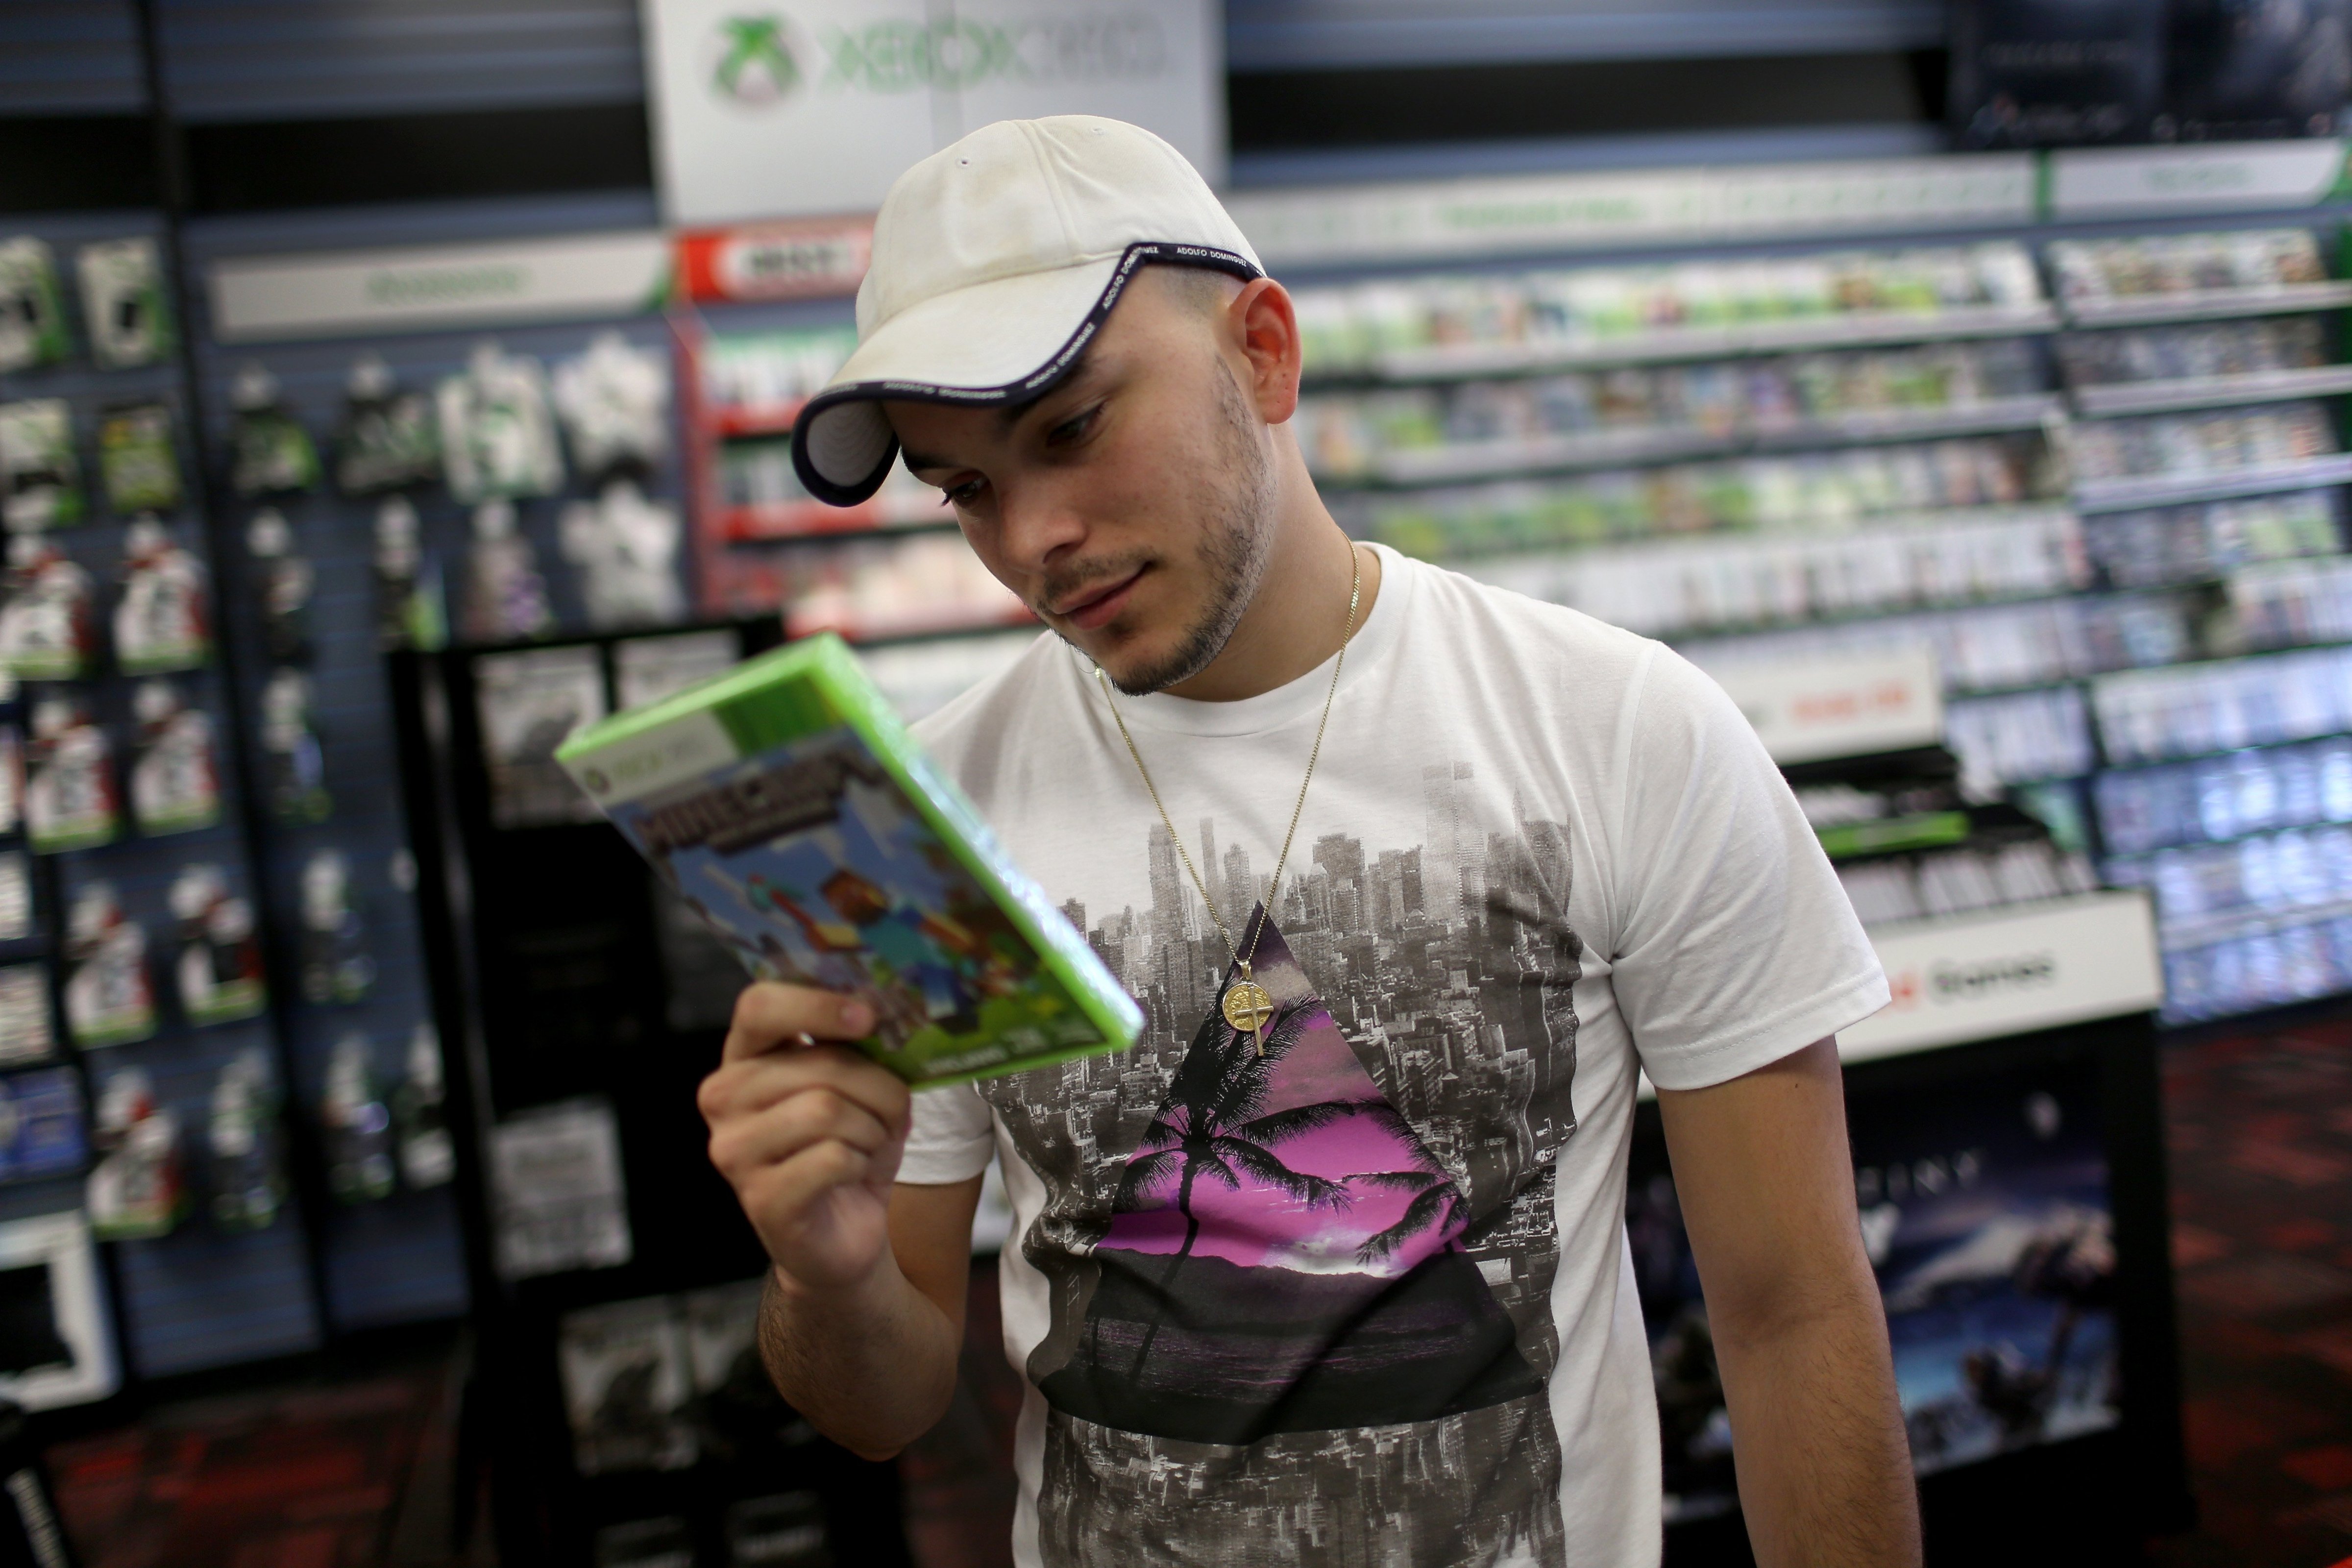 MIAMI, FLORIDA - SEPTEMBER 15: Daniel Llevara checks out the XBox 360 Minecraft game at a GameStop store on Sept. 15, 2014 in Miami. (Joe Raedle—Getty Images)